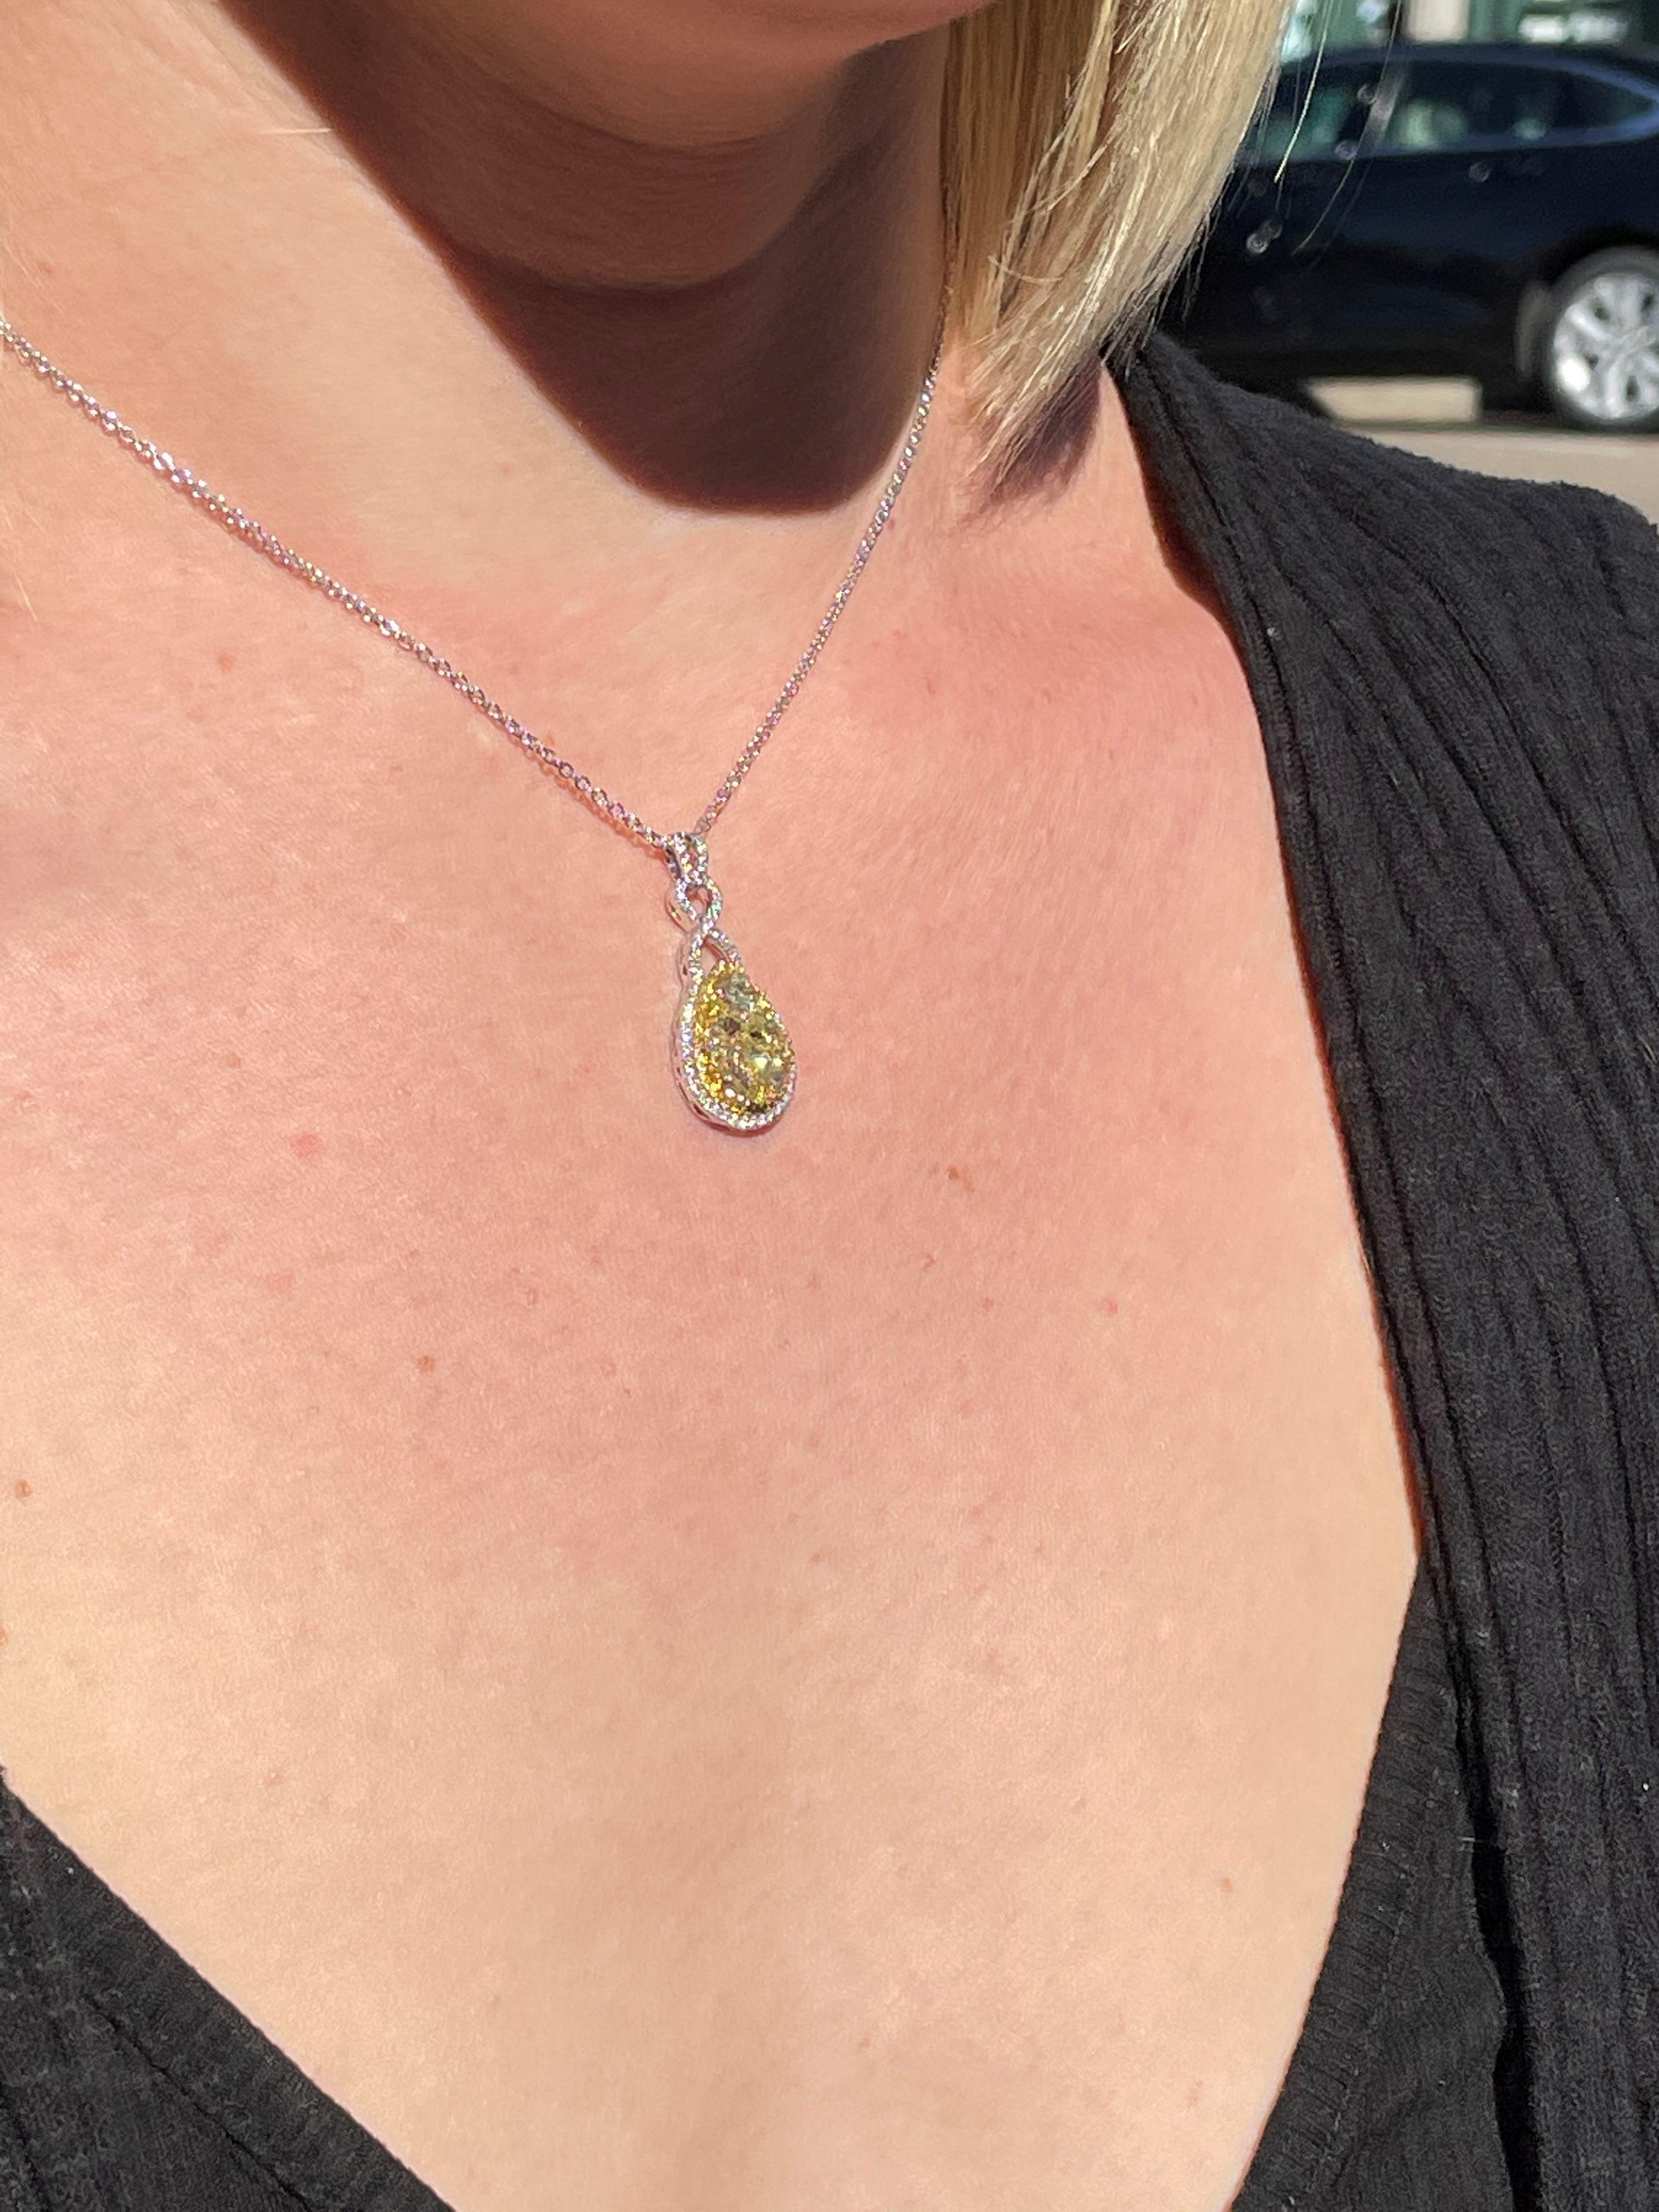 18 Karat Gold Yellow and White Diamond Teardrop Cluster Pendant Necklace In Excellent Condition For Sale In La Jolla, CA